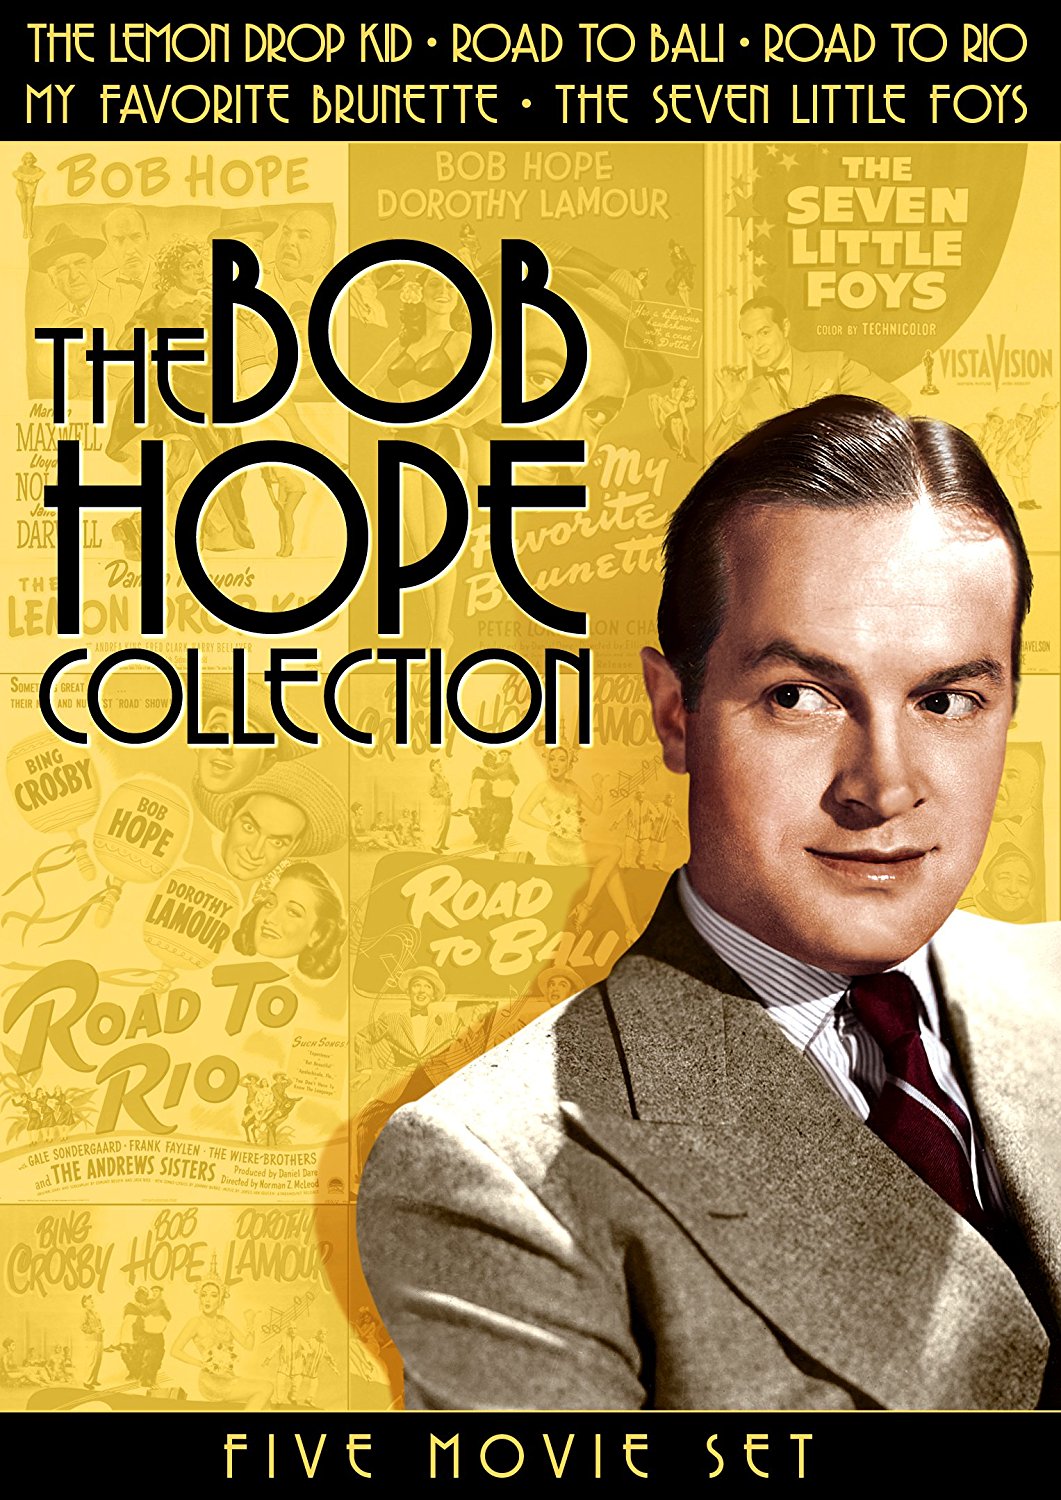 The Bob Hope Collection: (The Lemon Drop Kid / Road to Bali / Road to Rio / My Favorite Brunette / The Seven Little Foys)